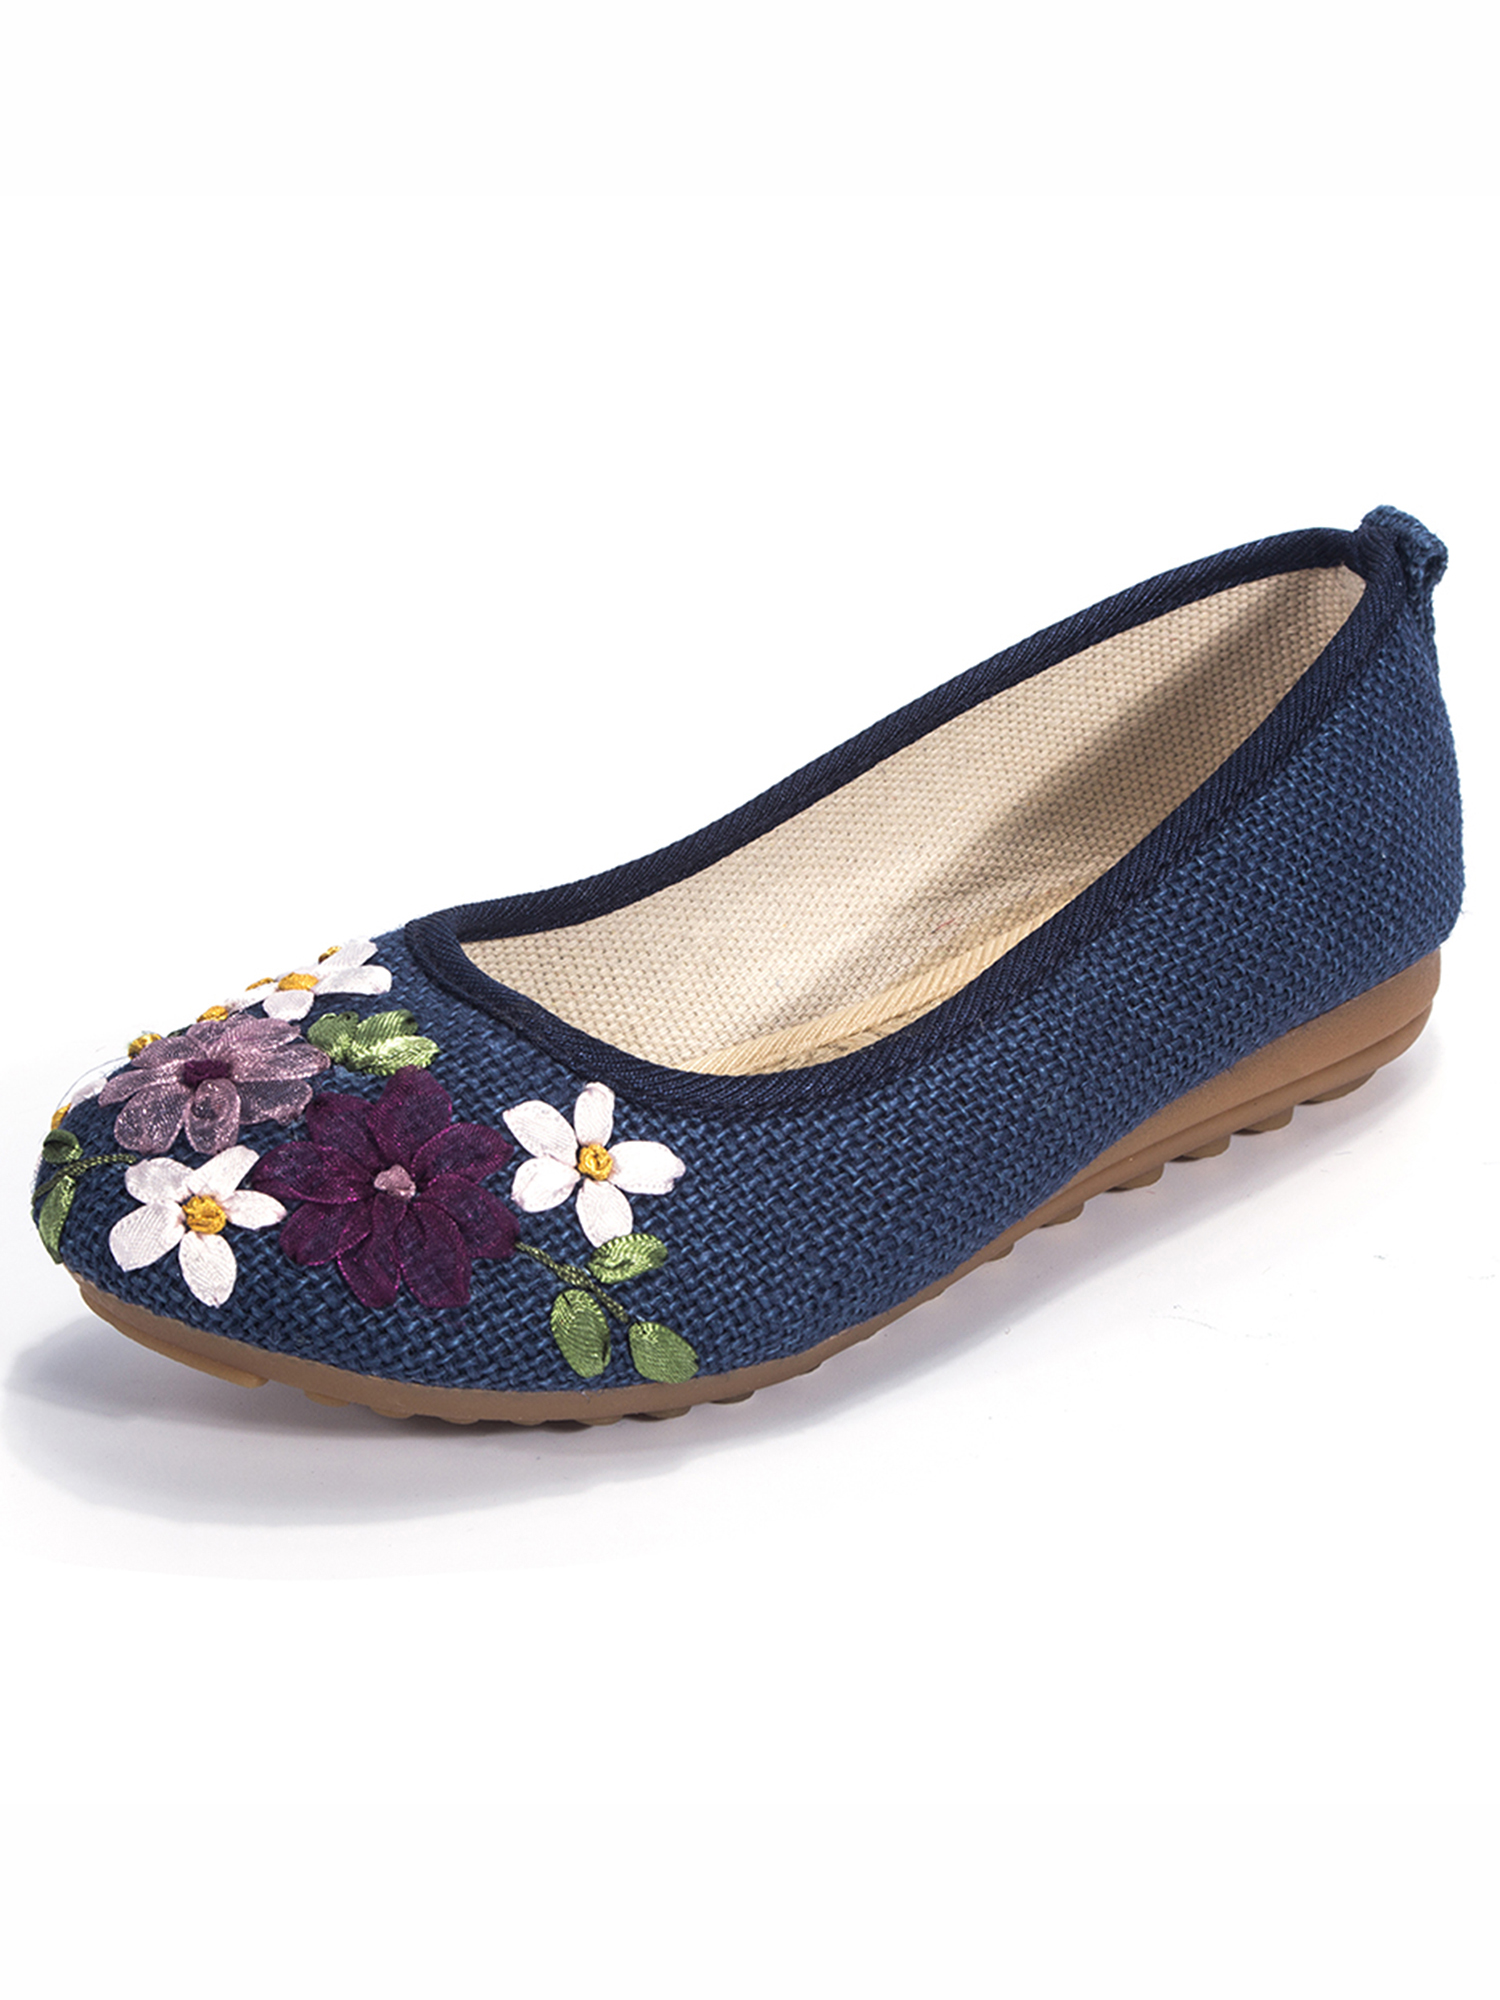 FANNYC Women's Ballet Flats Shoe Slip On Casual Driving Loafers Hemp soled shoes Non-Slip Flat Walking Shoes Slip On Flats Shoes Round Toe Ballet Flats with Delicate Embroidery Flower - image 2 of 7